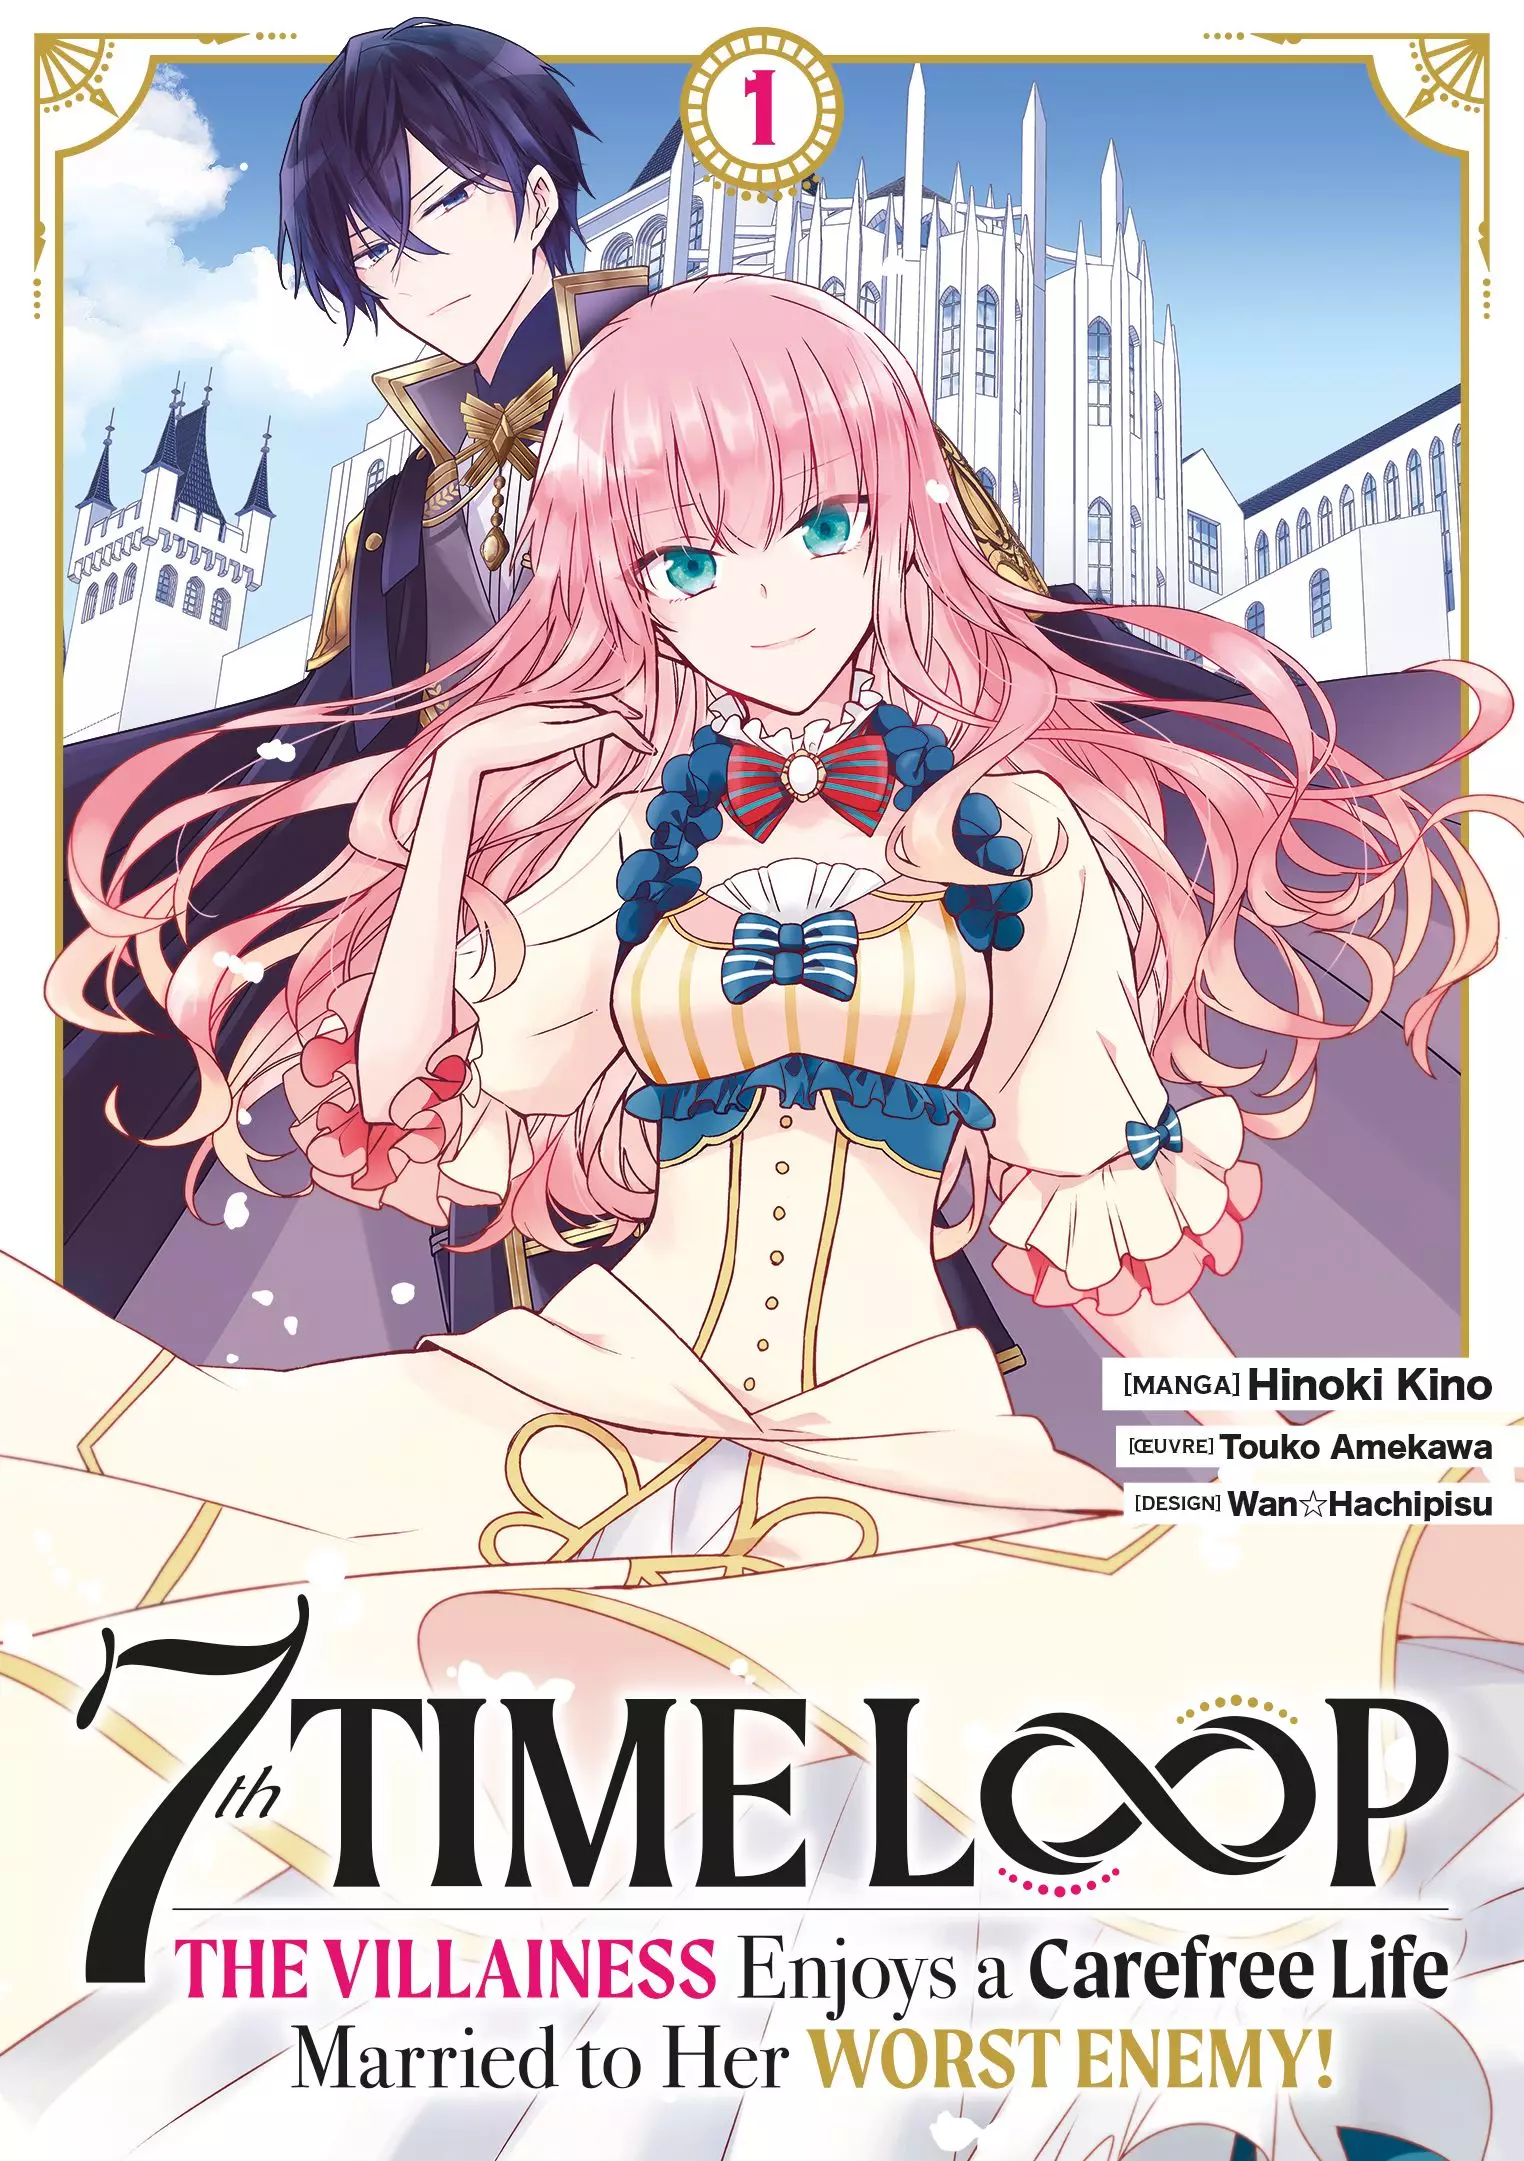 7th Time Loop - The Villainess Enjoys a Carefree Life 7th_Time_Loop_villainess_1_meian